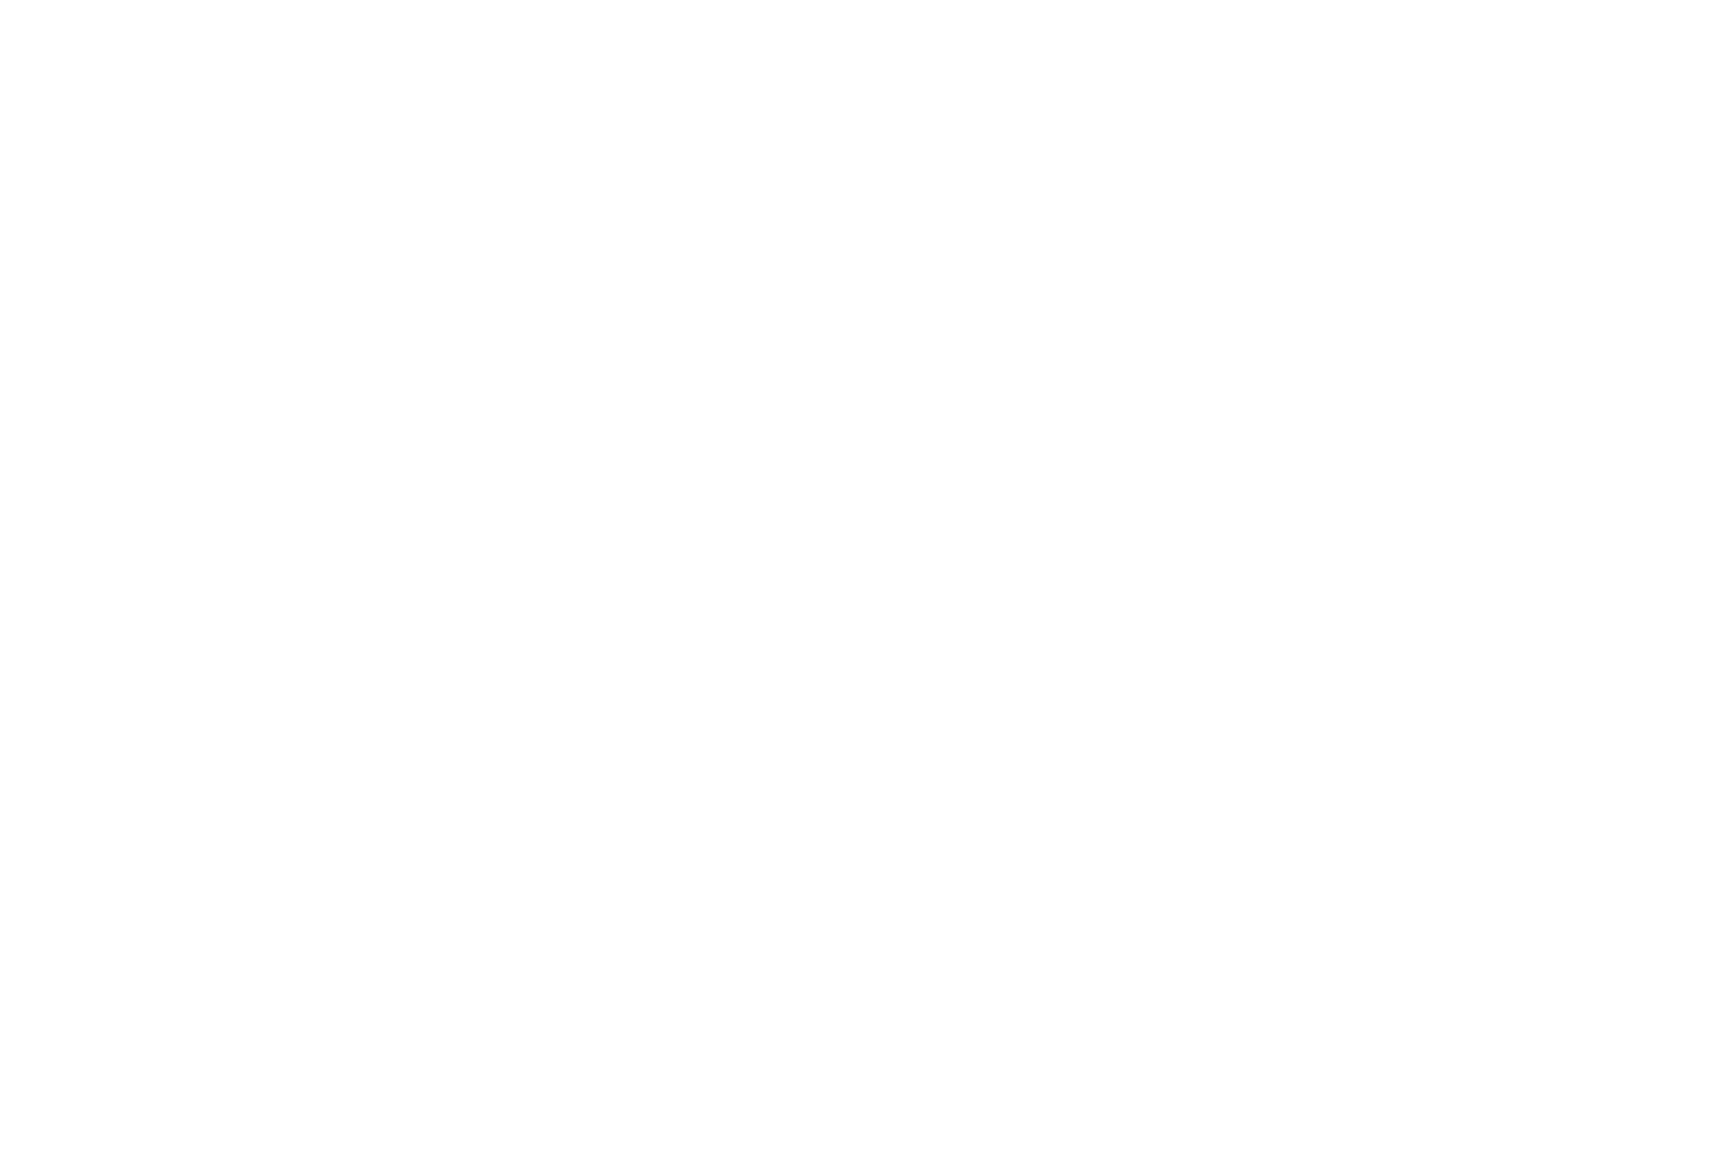 Best Mid-Length Feature Film - New York City Independent Film Festival - 2021 (1)